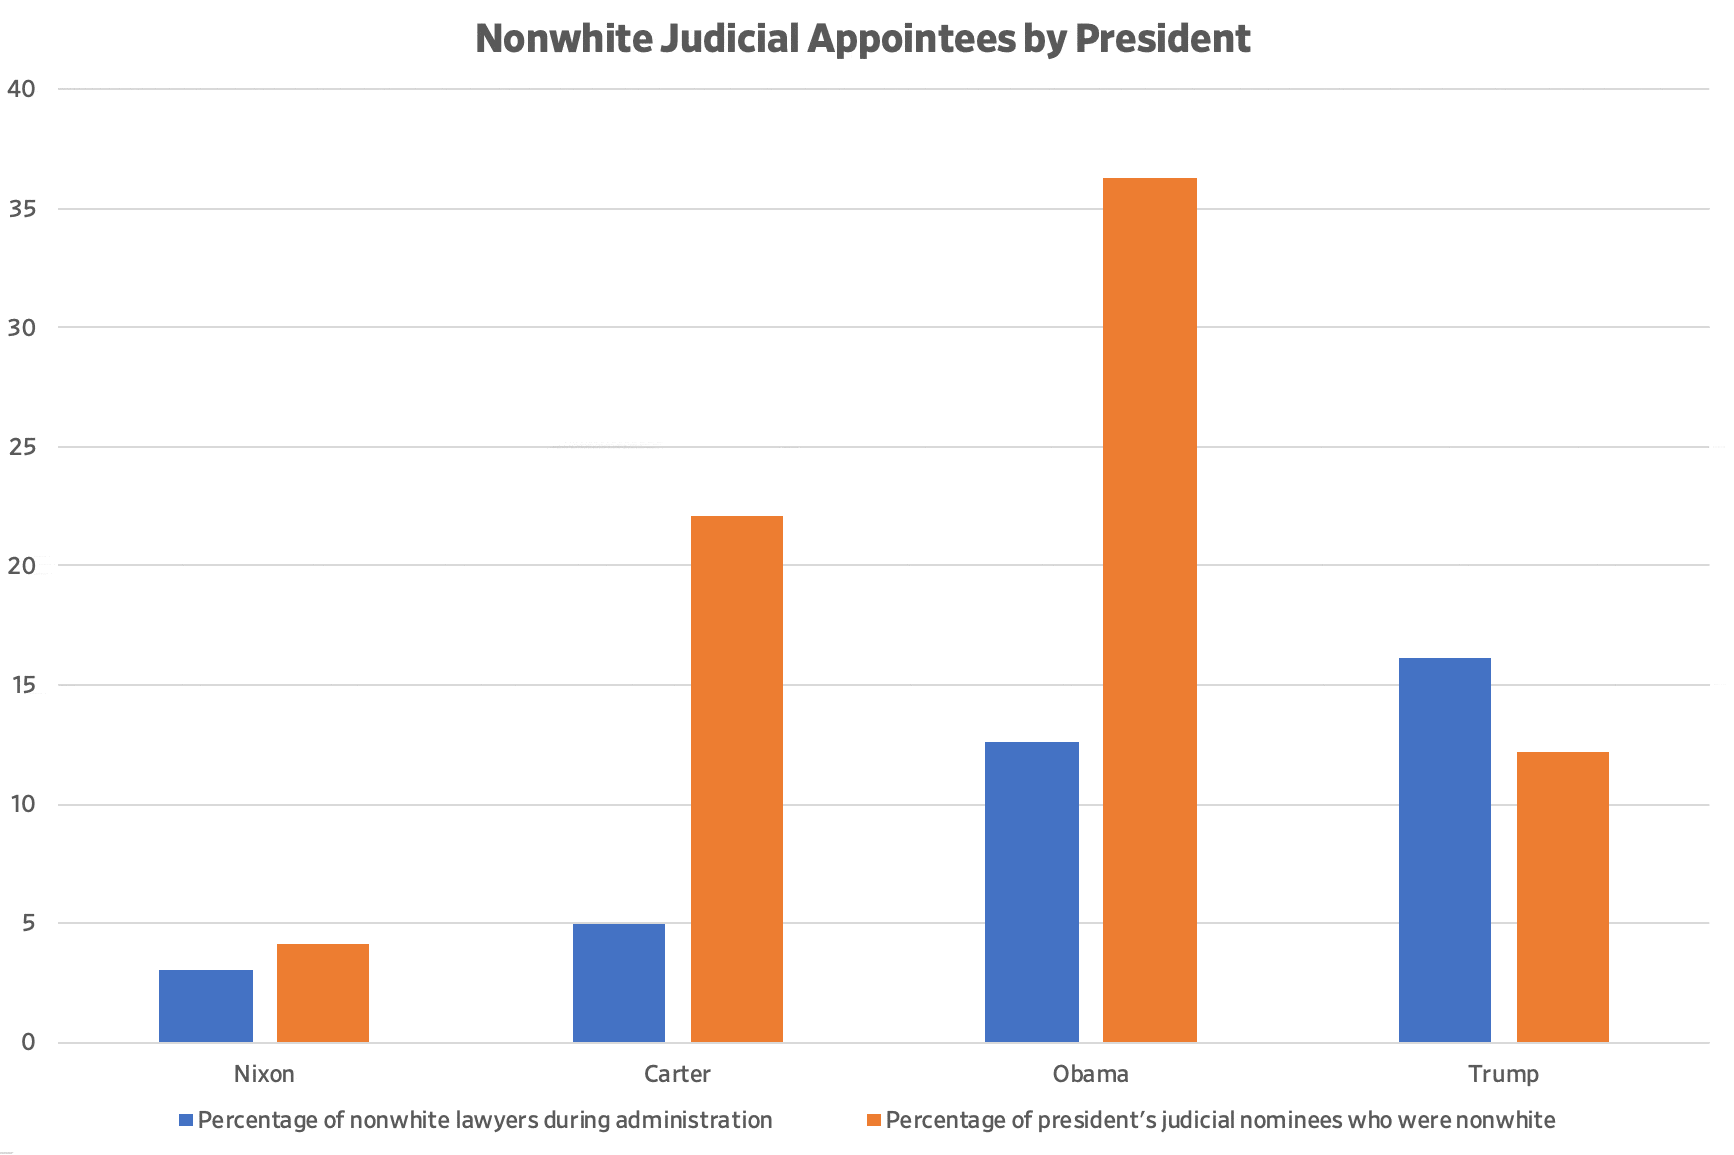 Nonwhite judicial appointments by President